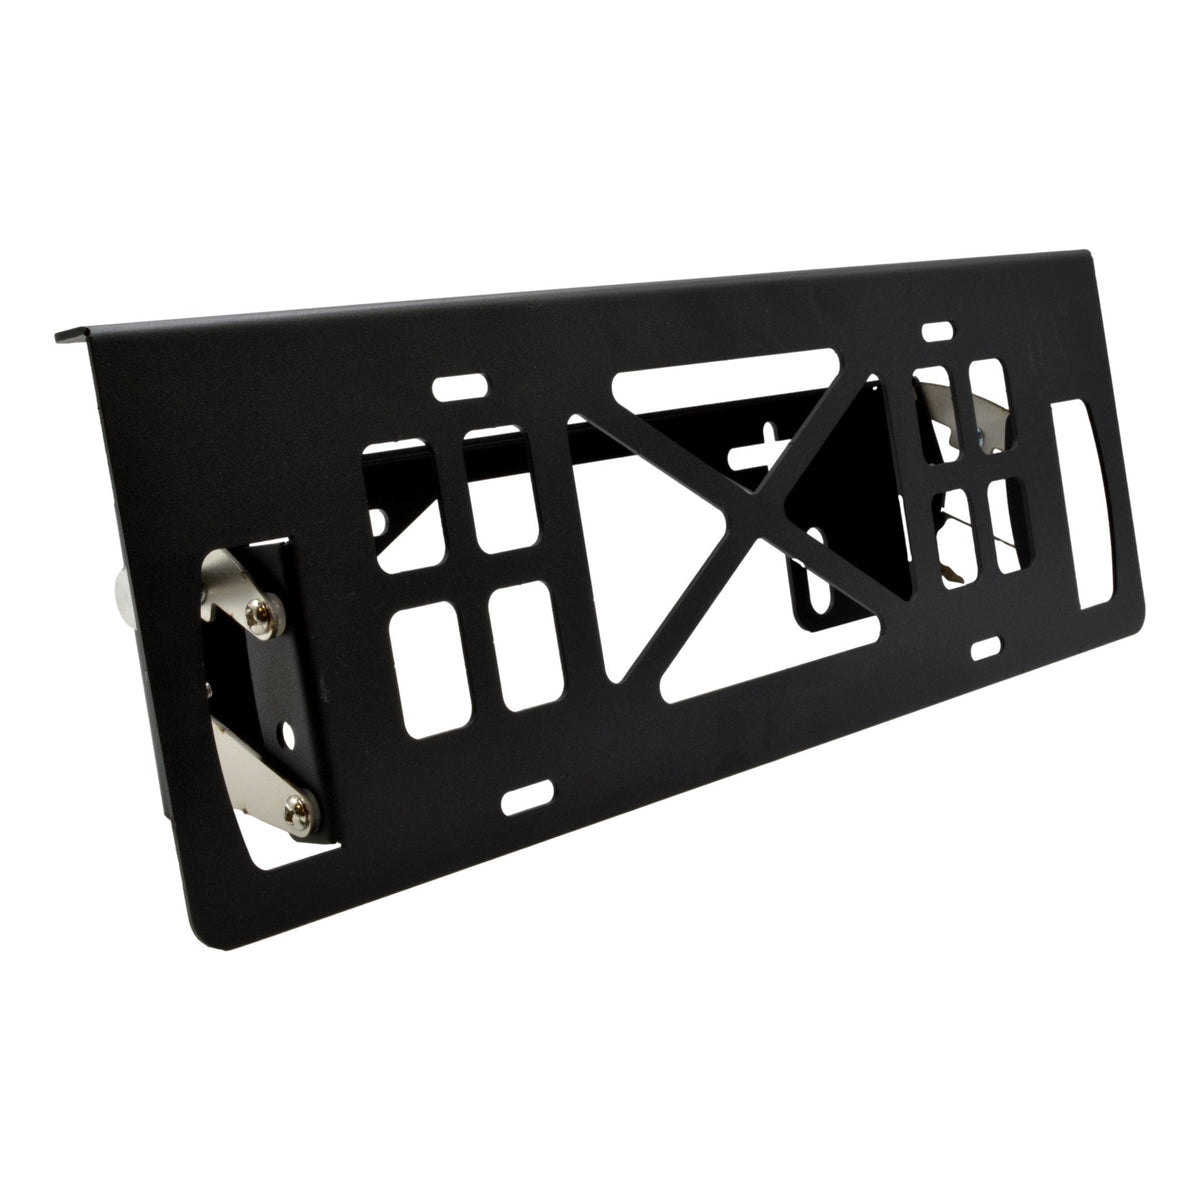 Carbon Offroad Stainless Steel Black Powdercoat Pull Up Number Plate Bracket - CW-NPBV2 1